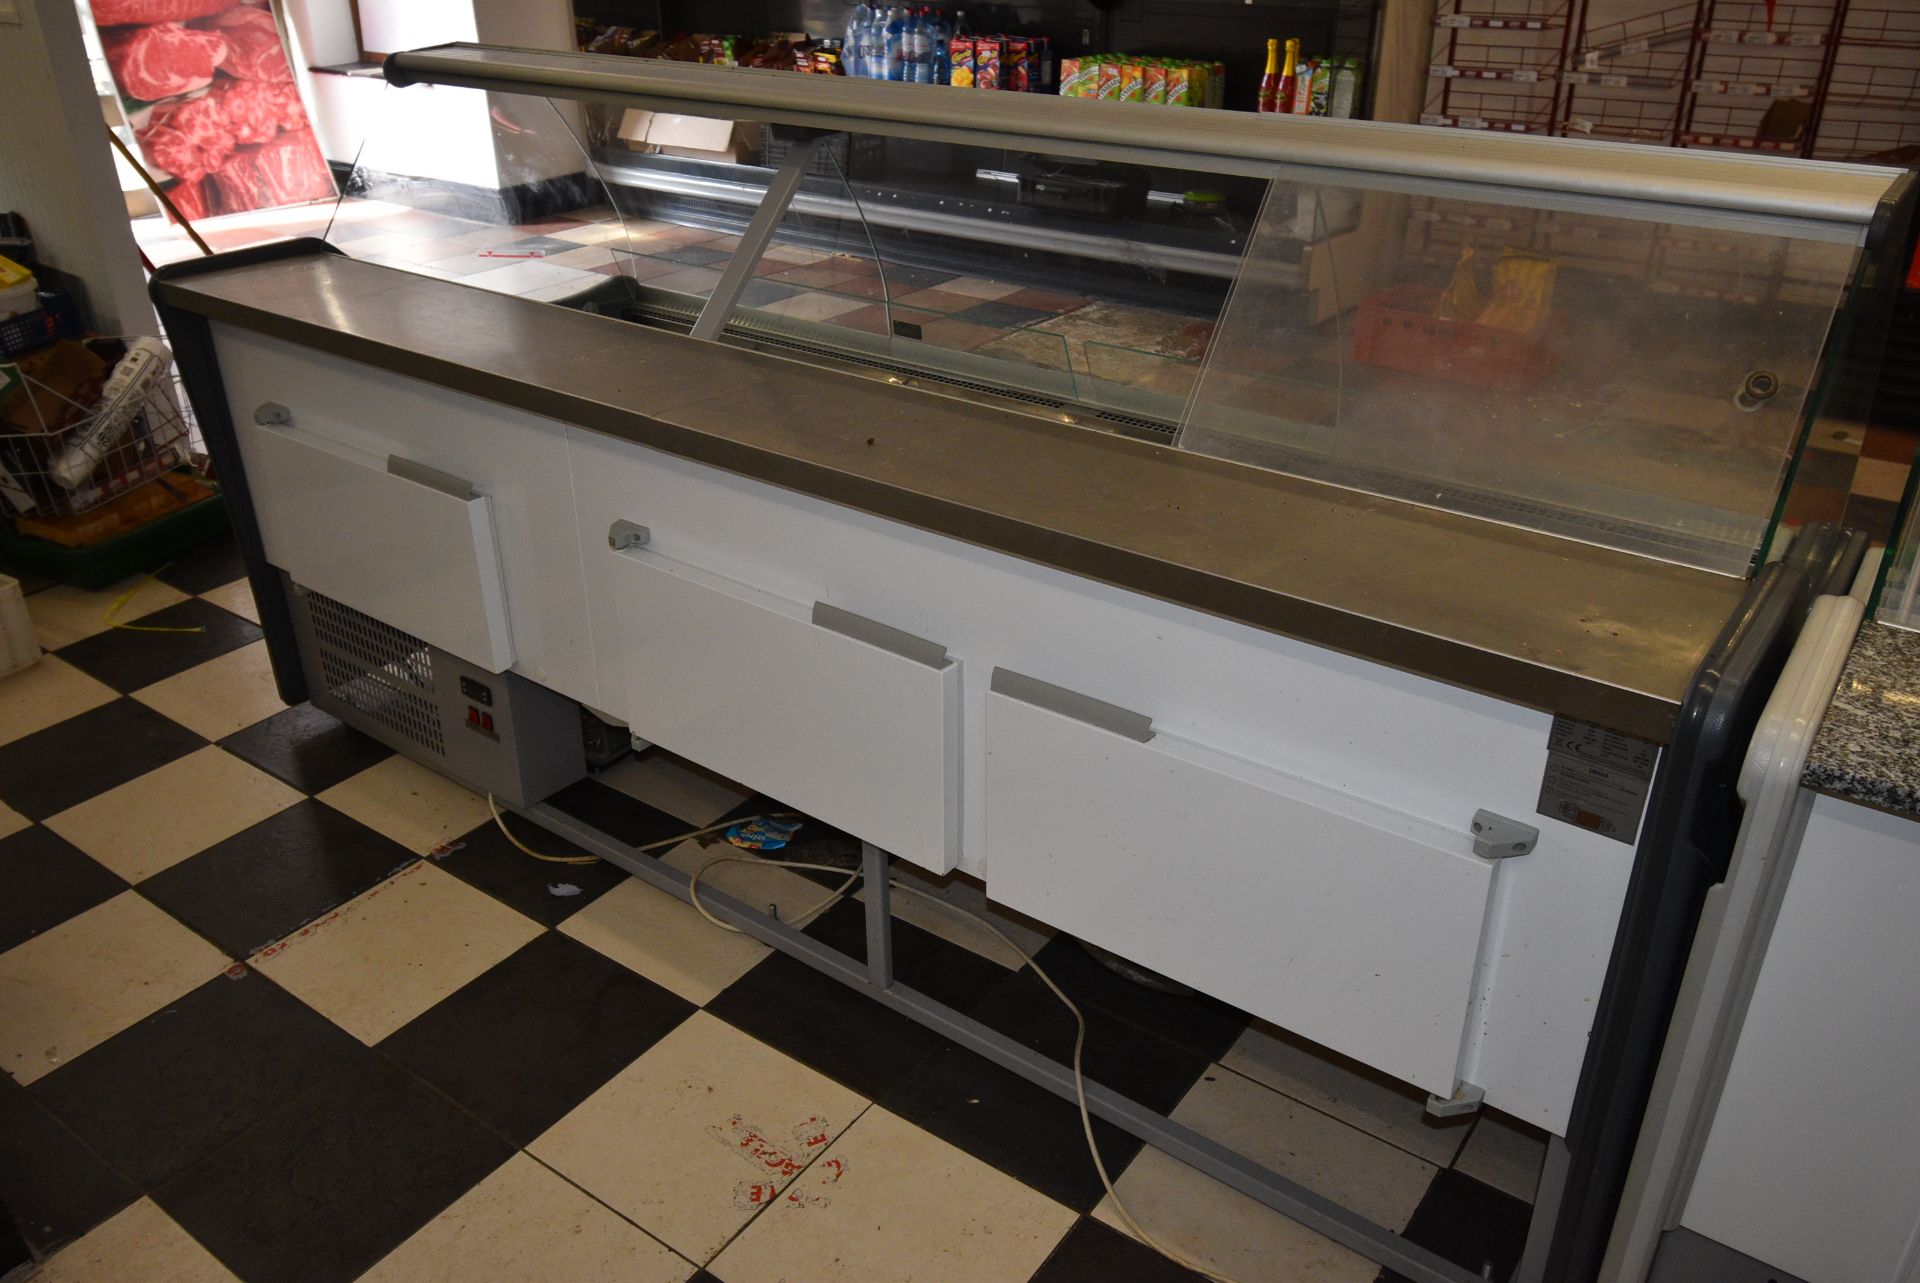 Bochnia Cebea Refrigerated Server Over Counter with Stainless Steel Top and Three Storage Lockers - Image 3 of 4